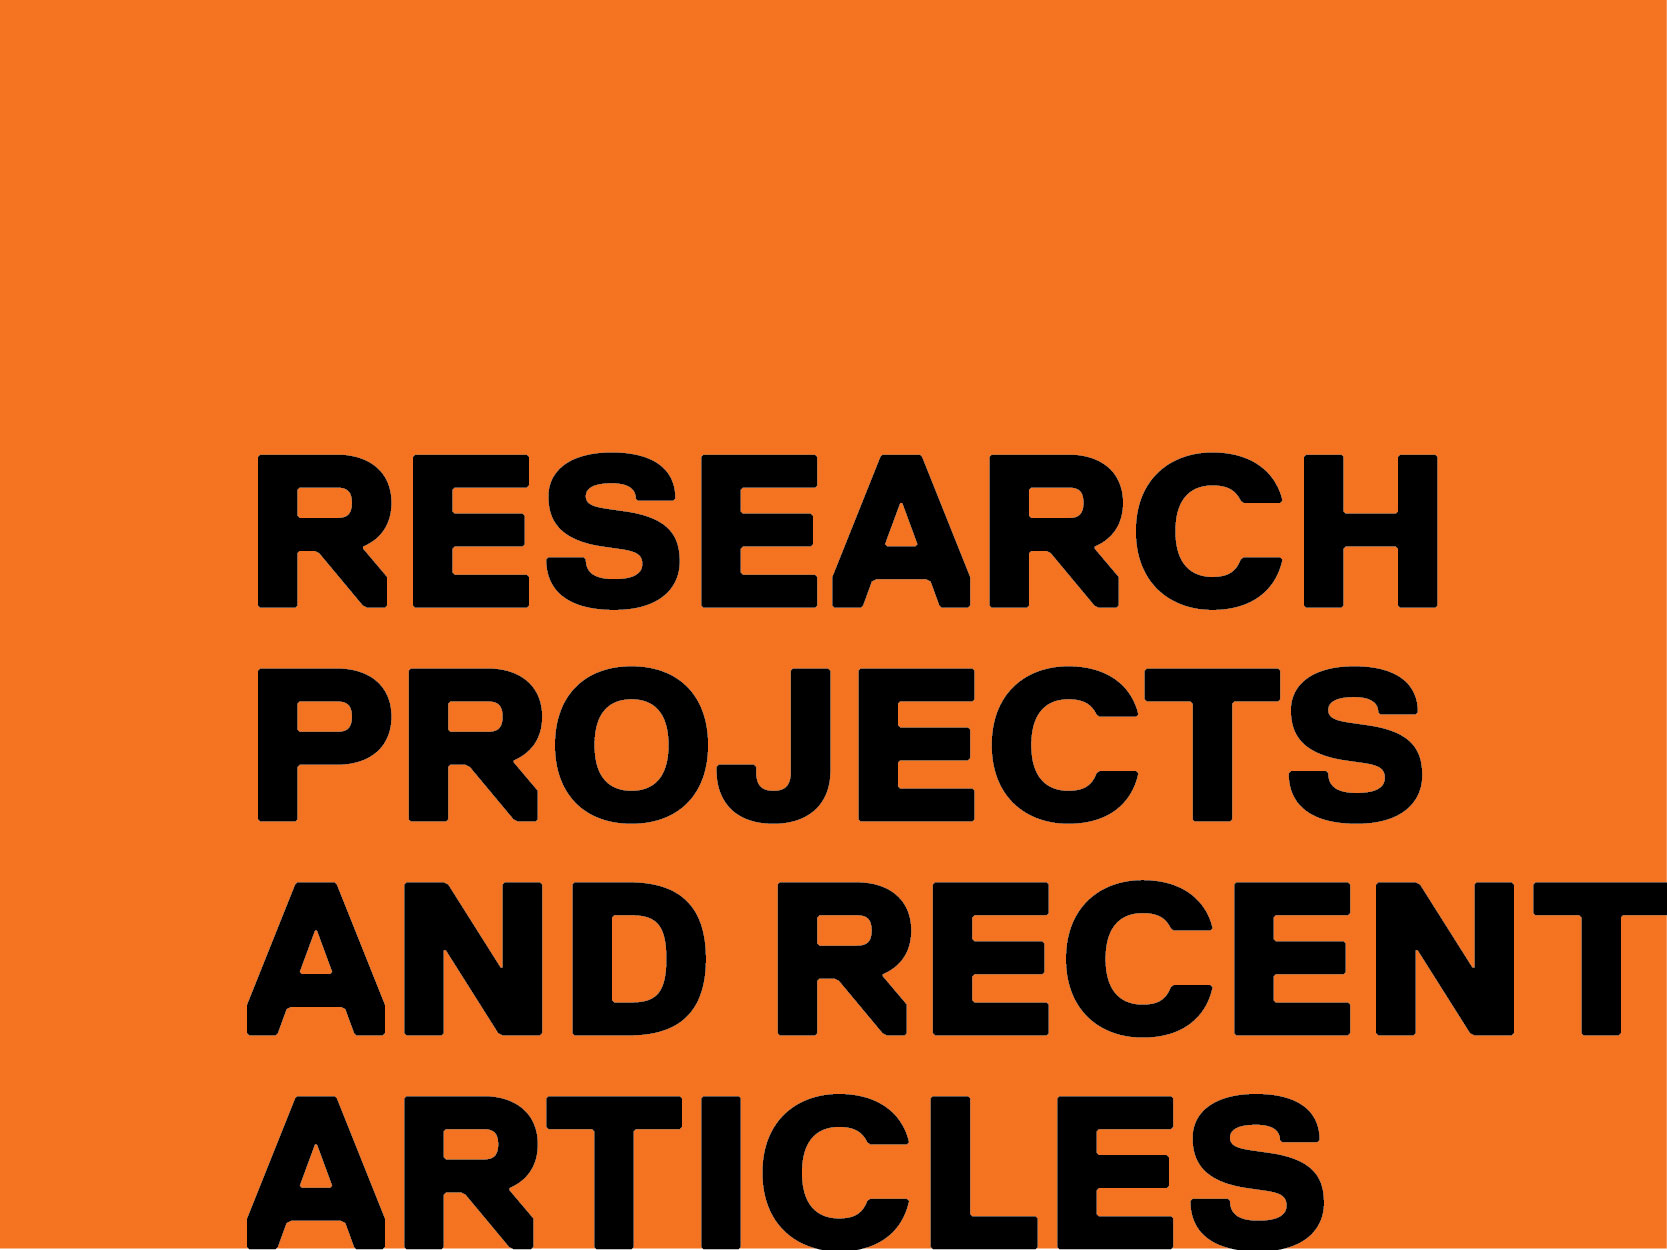 Research Projects and Recent Articles.